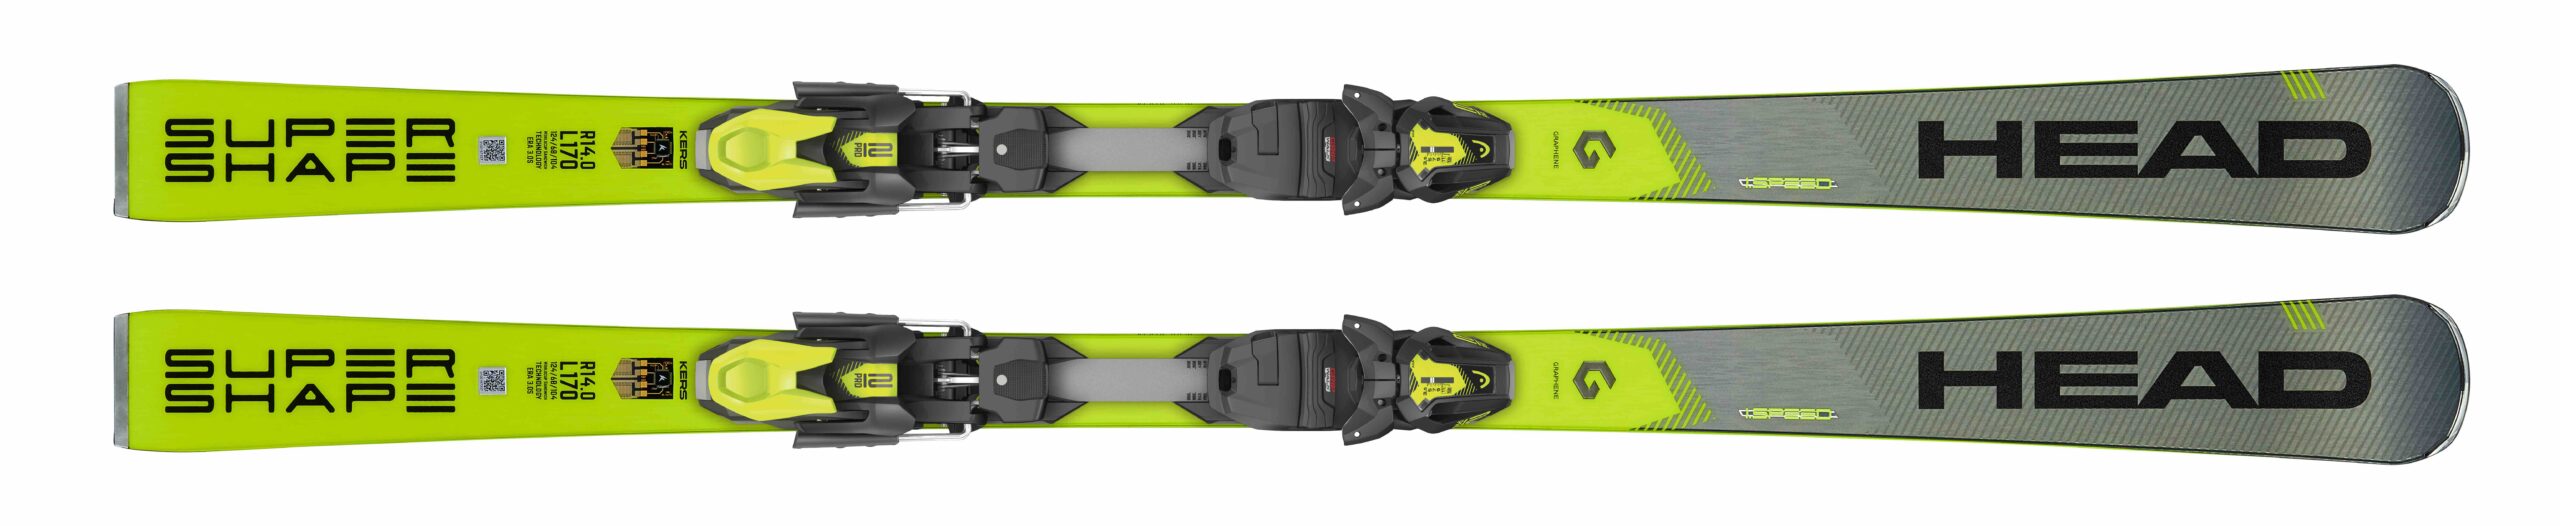 2021 Men's Technical Skis - Realskiers